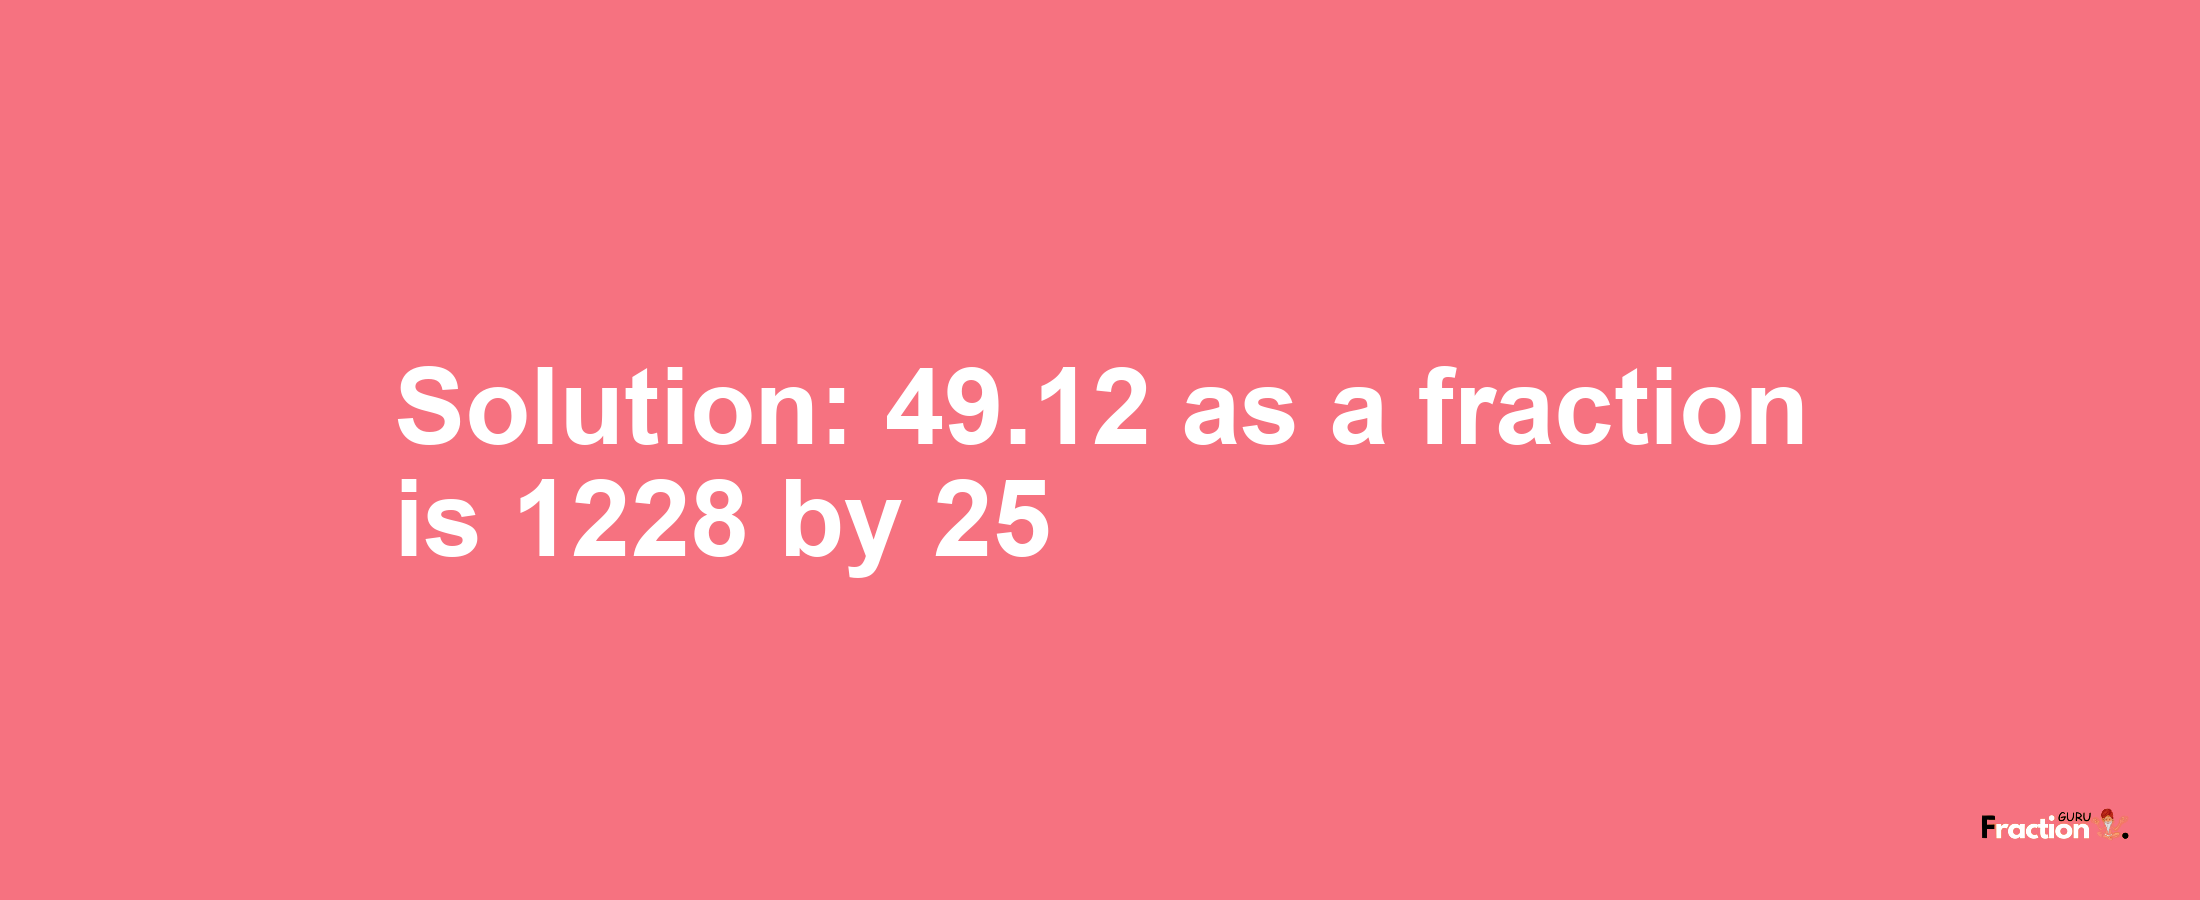 Solution:49.12 as a fraction is 1228/25